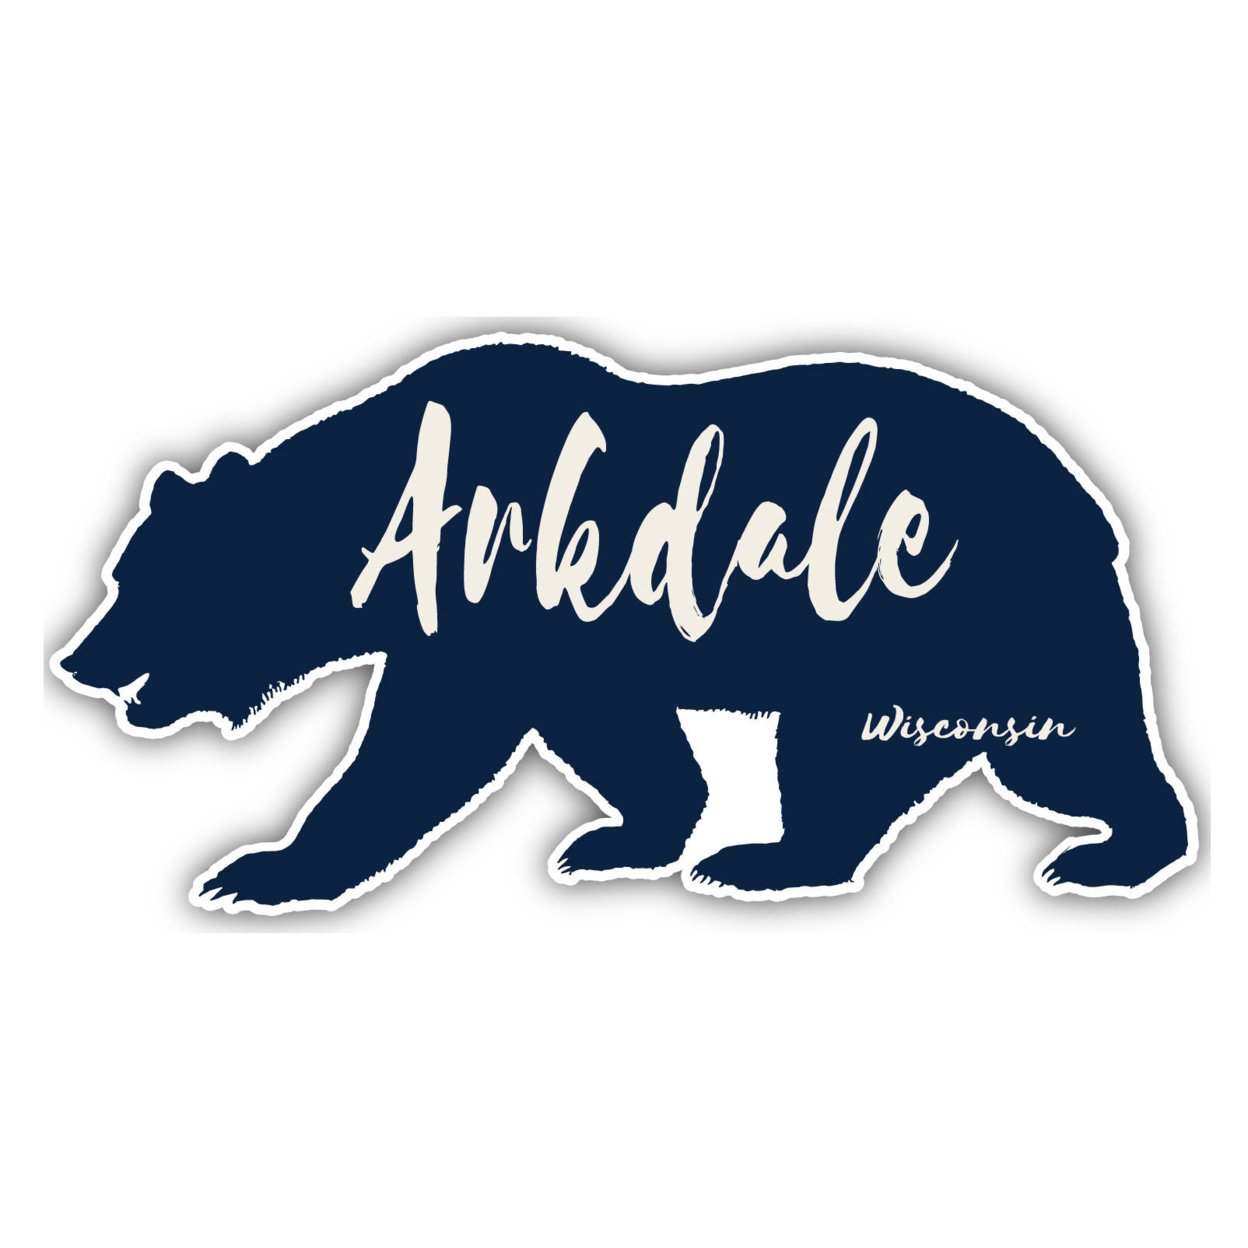 Arkdale Wisconsin Souvenir Decorative Stickers (Choose Theme And Size) - 4-Pack, 2-Inch, Tent